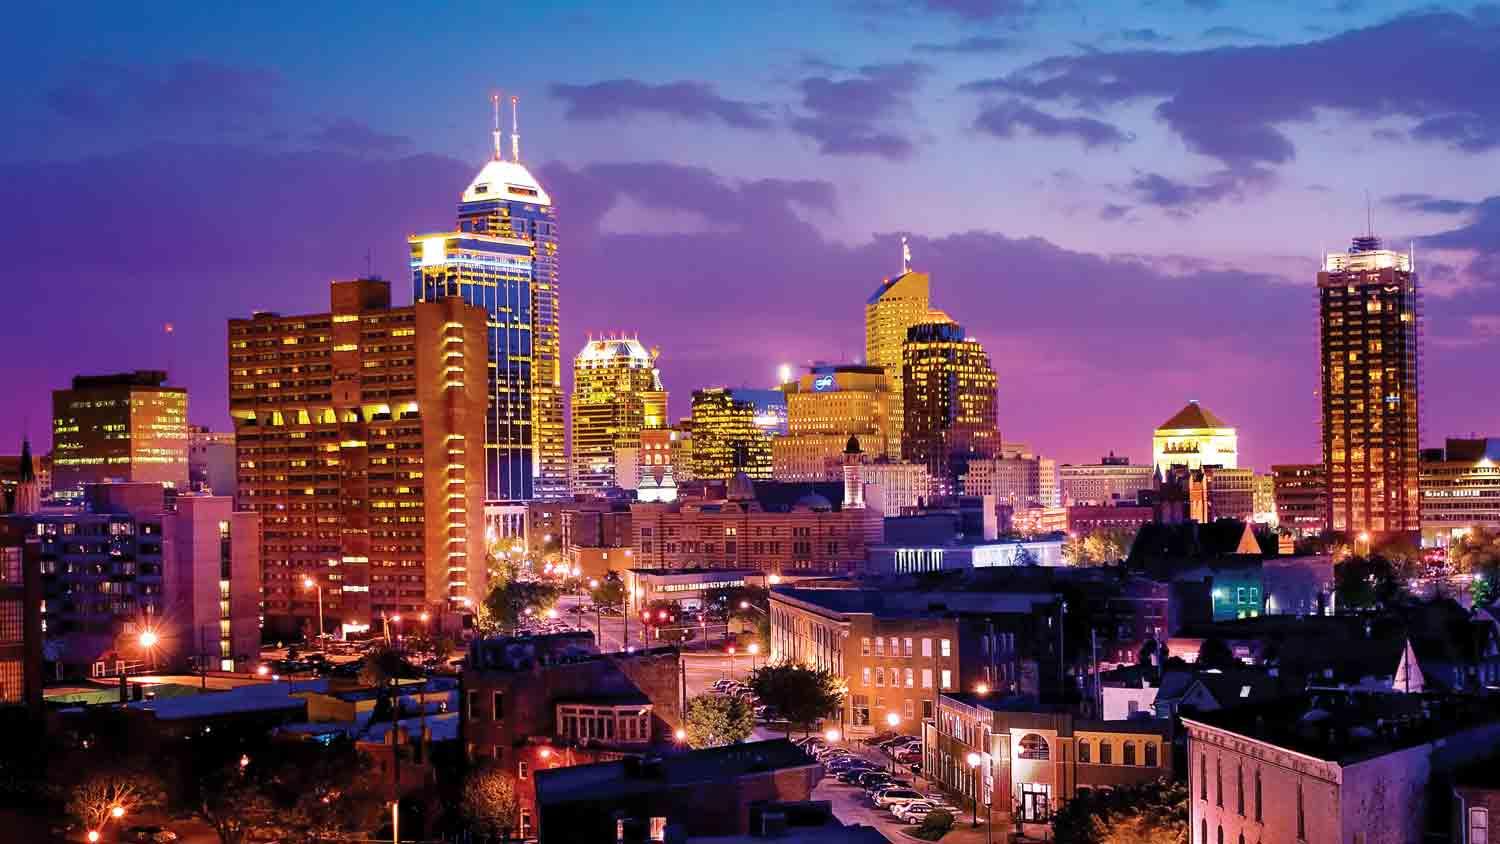 Indianapolis HD Wallpapers and Backgrounds